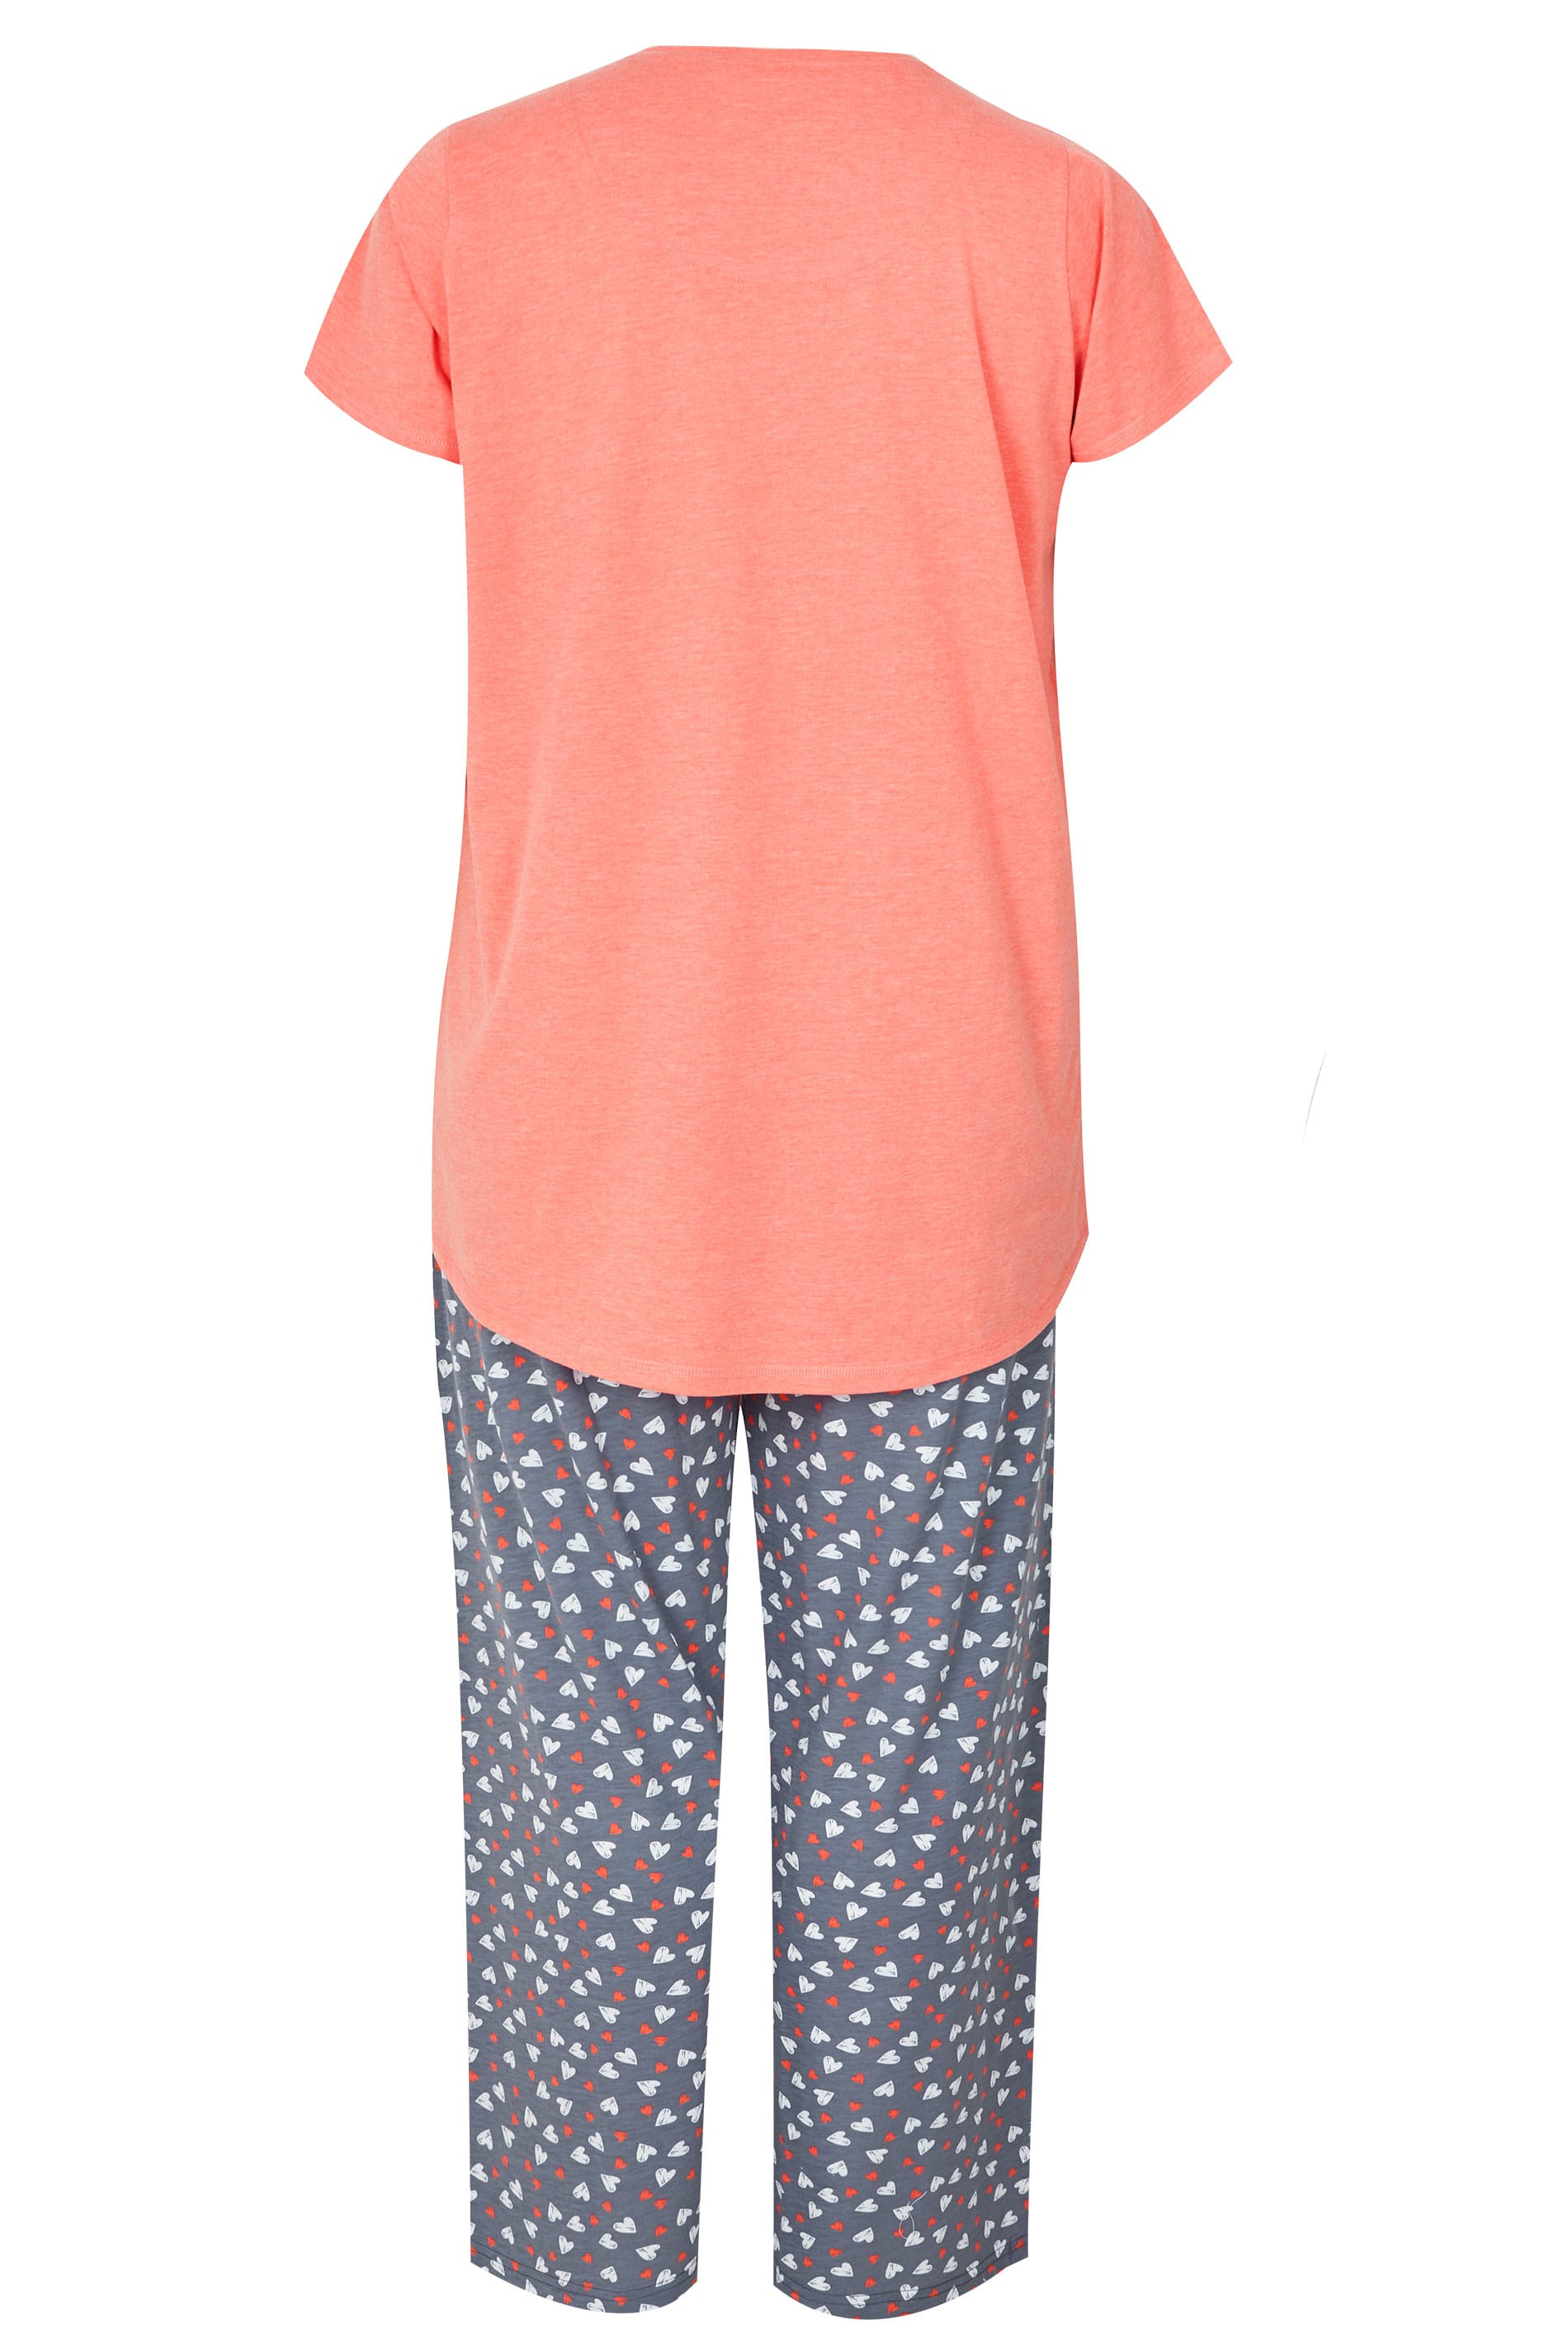 Plus Size Coral 'Queen' Pyjama Set | Sizes 16 to 36 | Yours Clothing